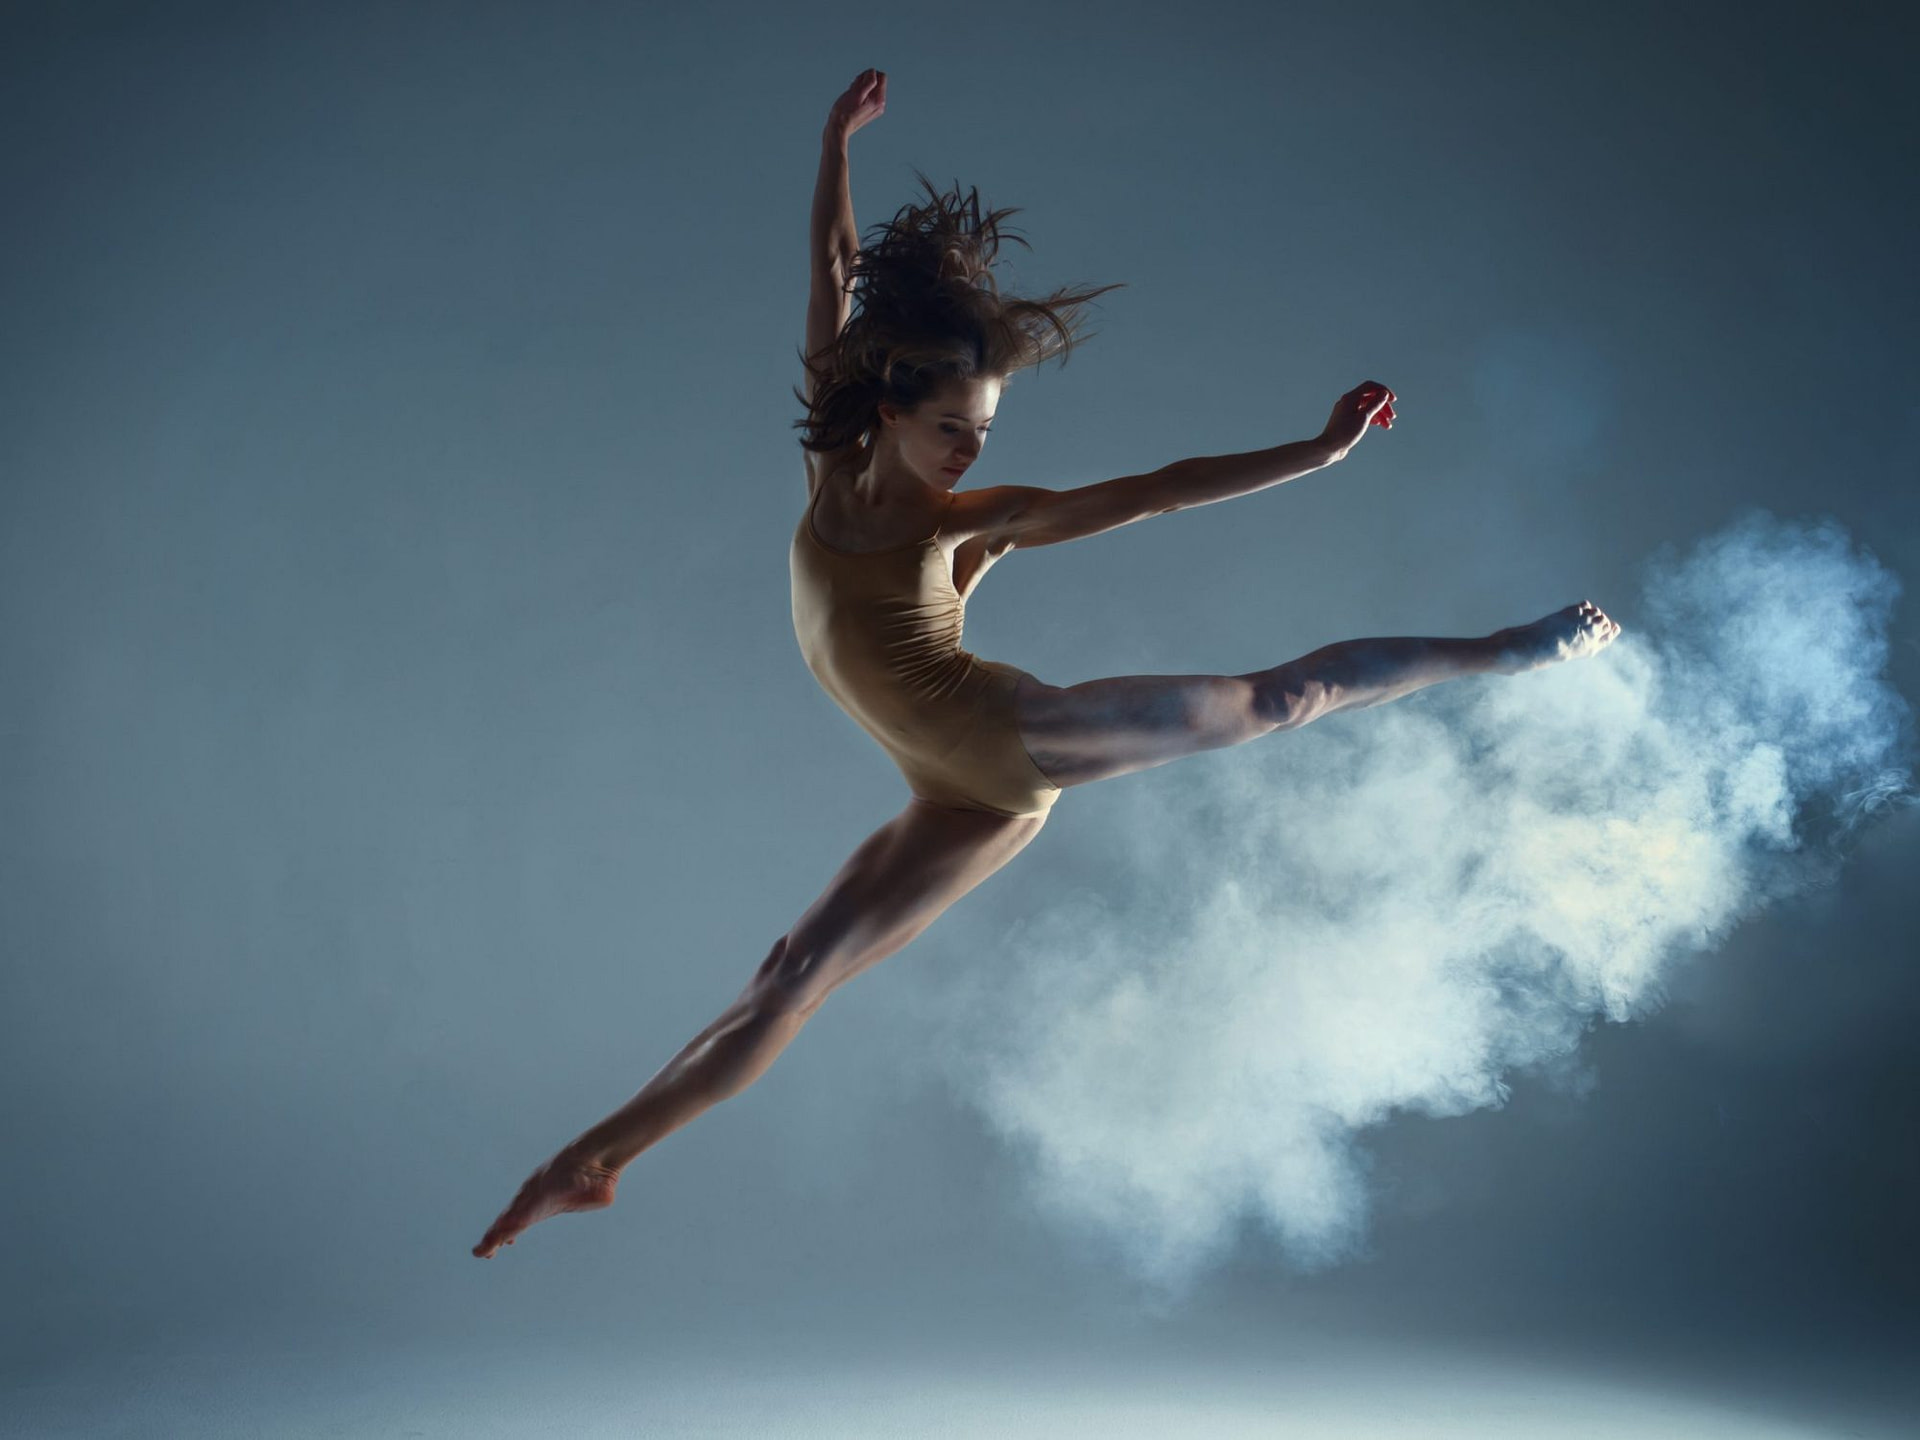 Dancing in cloud concept. Muscle brunette beauty female girl adult woman dancer athlete gymnast in smoke fog wearing dance bodysuit jumping in mid air, performance on isolated grey / black background